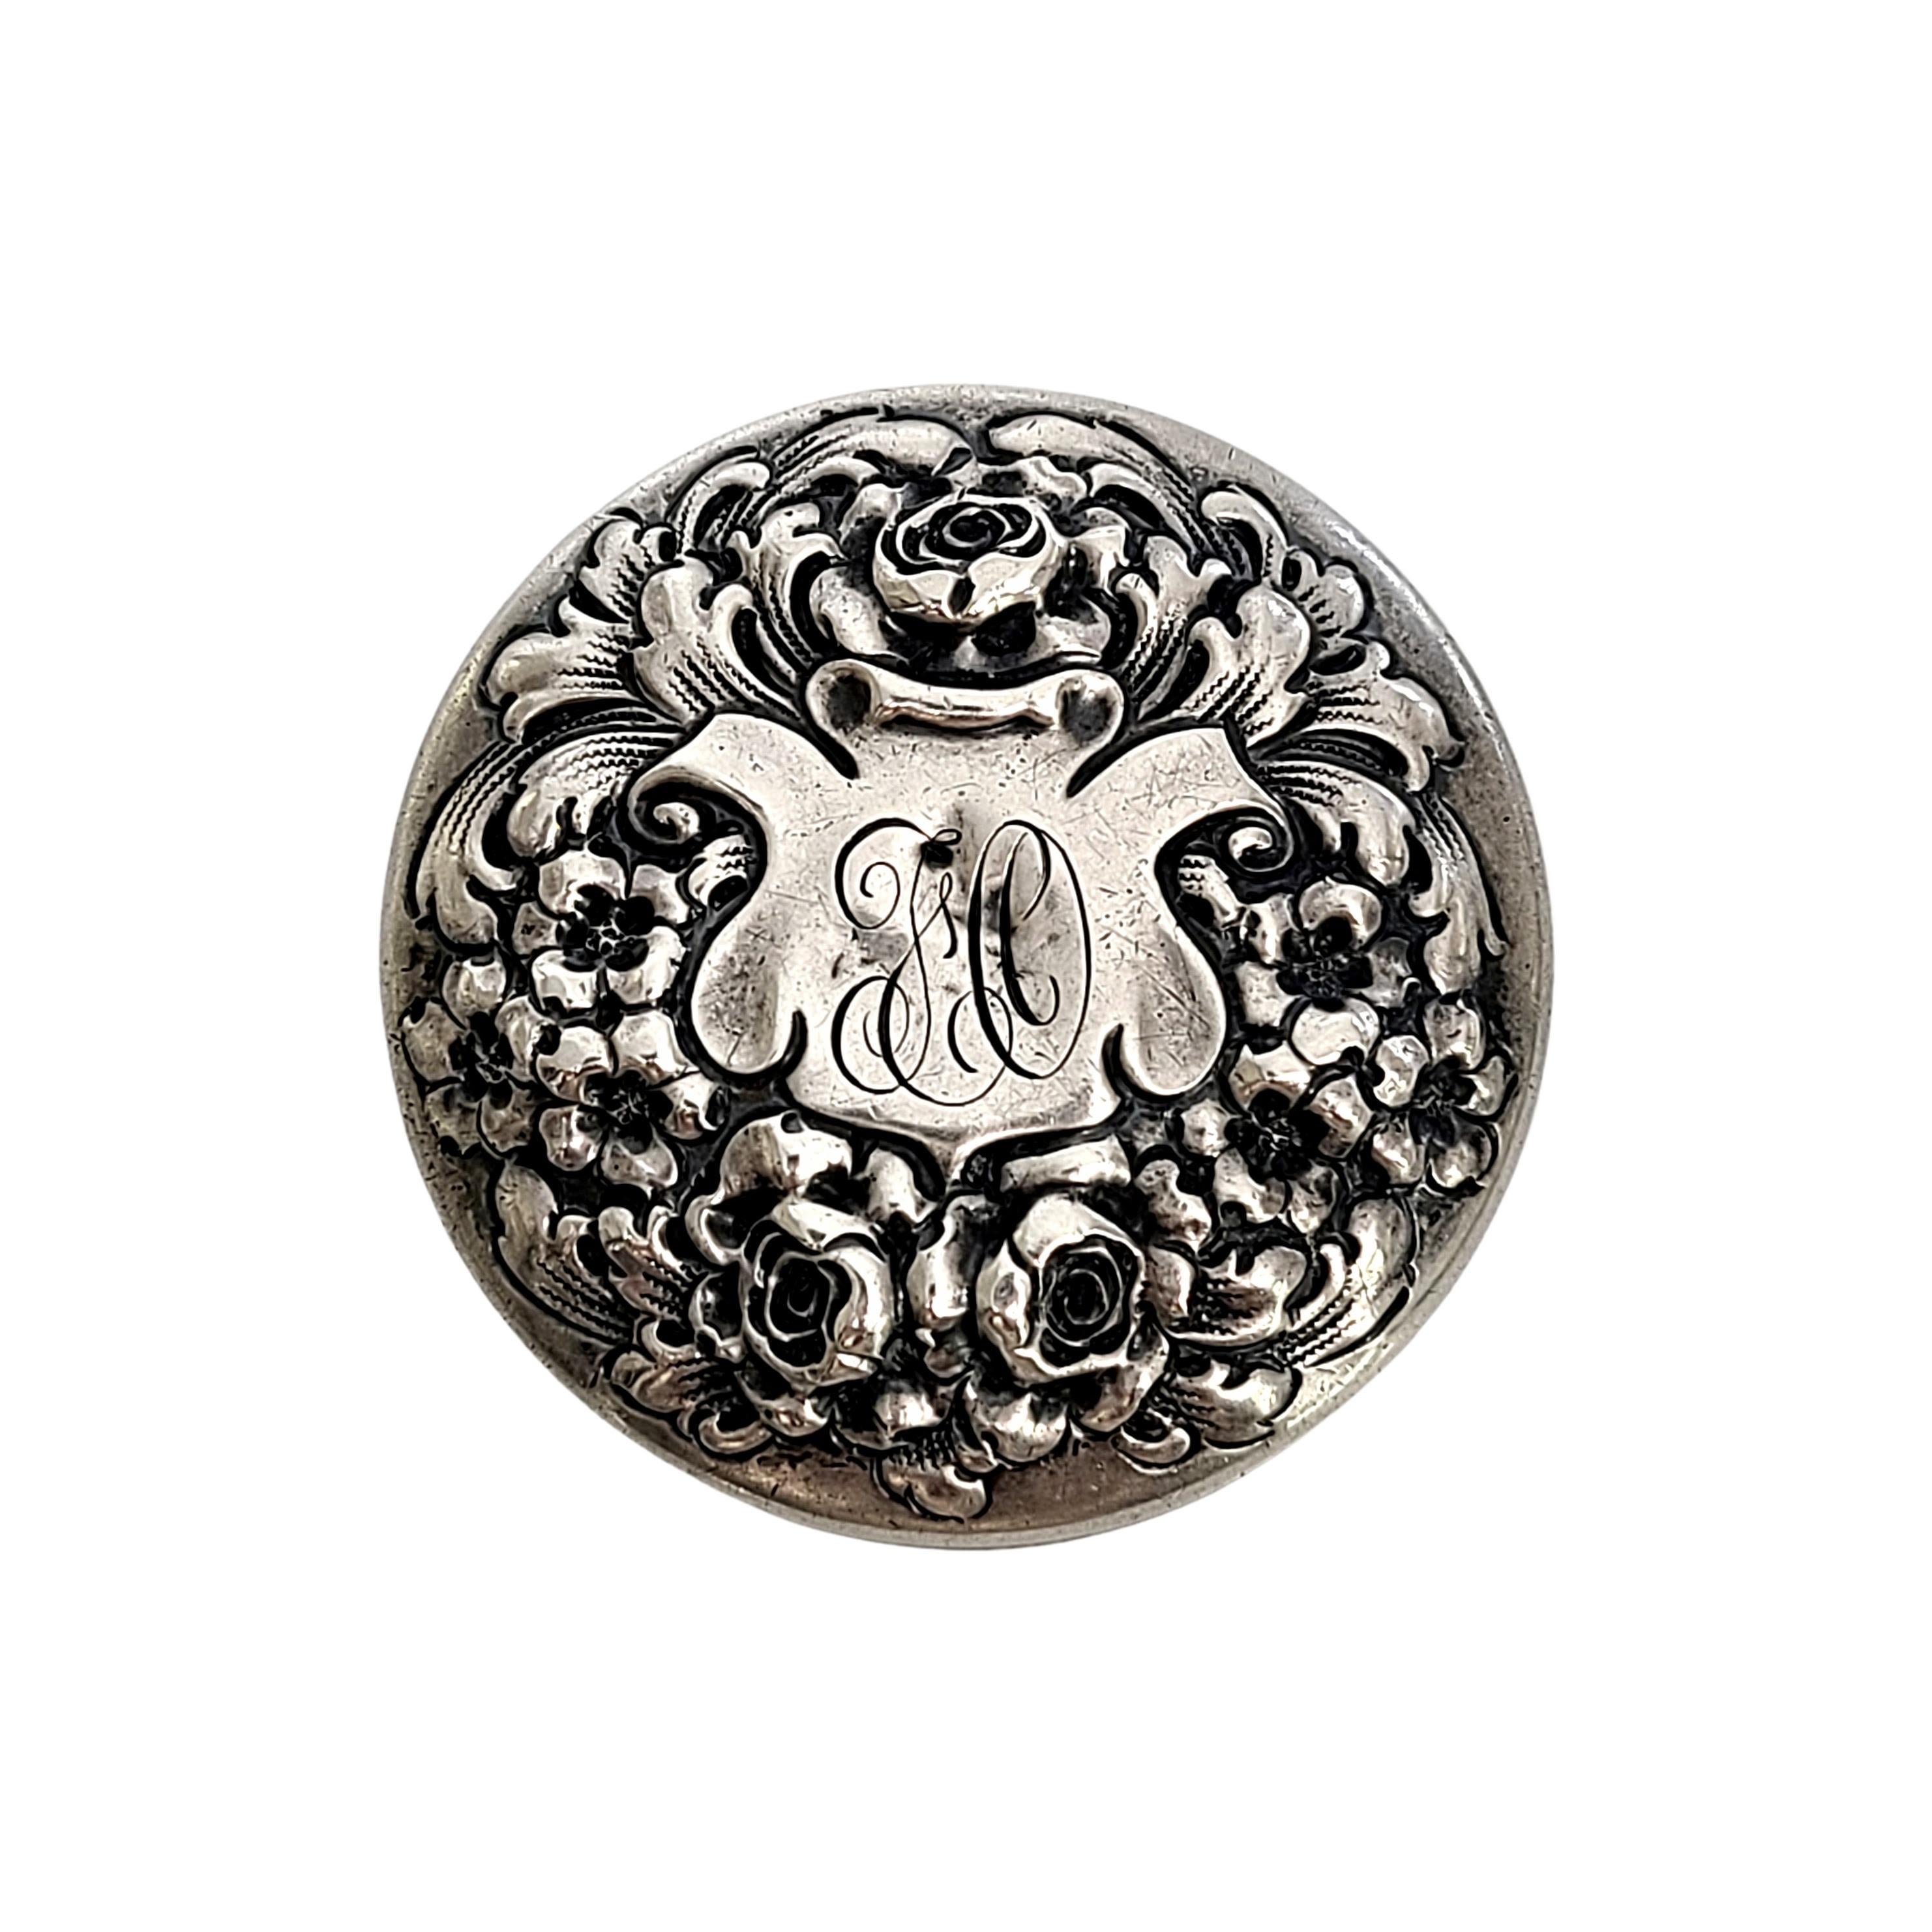 Sterling silver round pill box by Gorham, pattern # 1428M.

Monogram appears to be J&C

This sterling silver pill box features a repousse flower and flourish lid with a monogram at the center in a badge shaped cartouche.

Measures 1 7/8